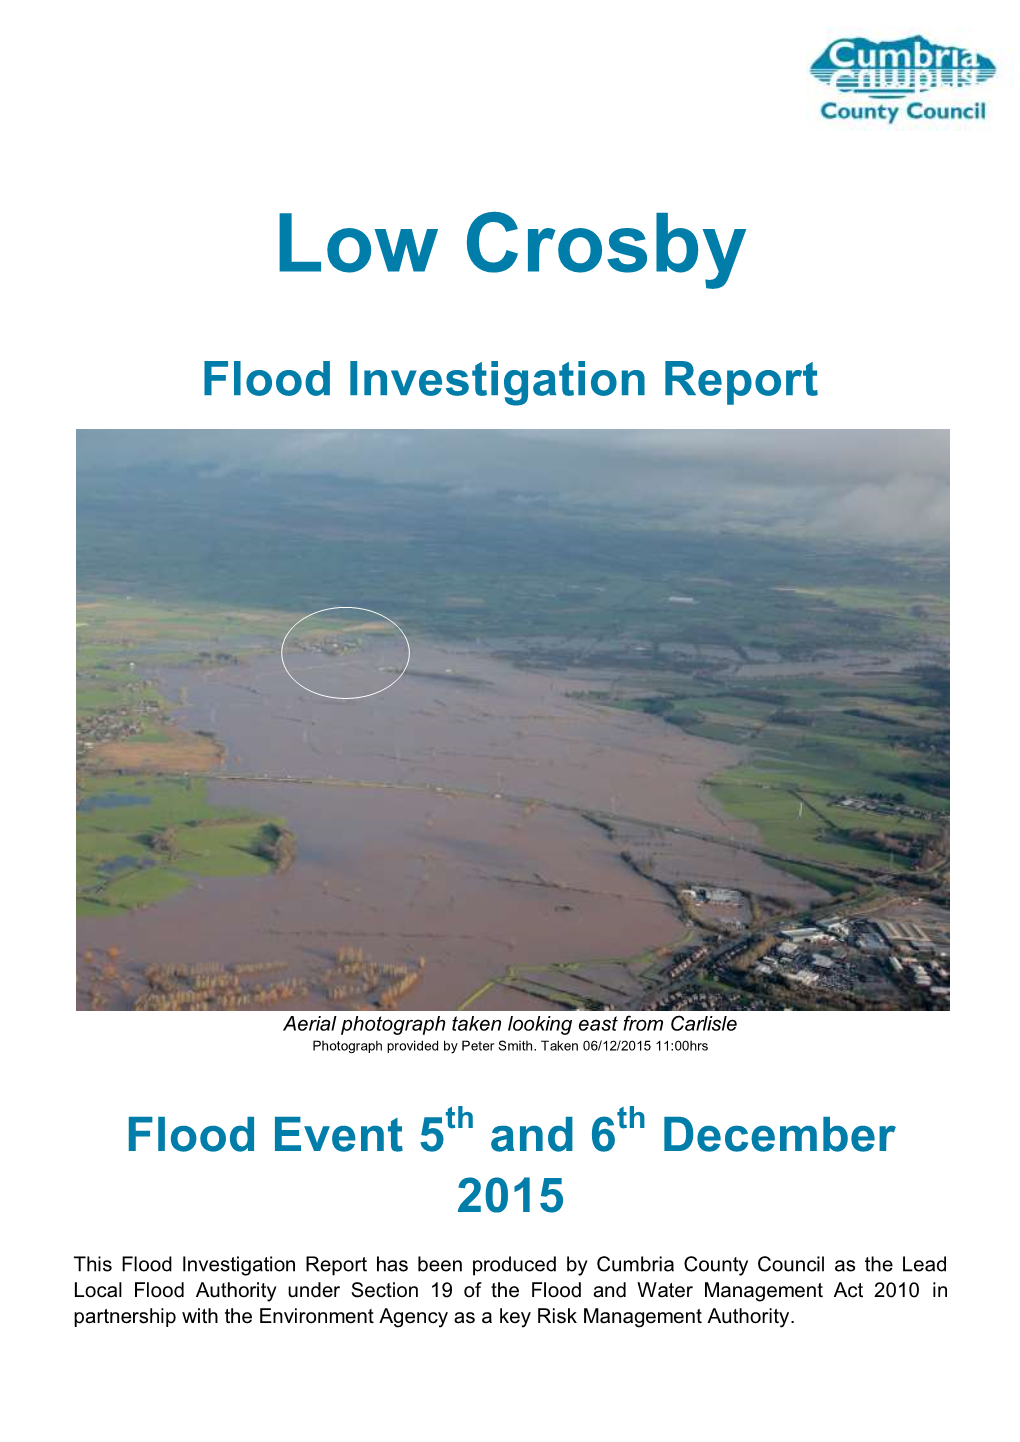 Low Crosby Final Flood Investigation Report